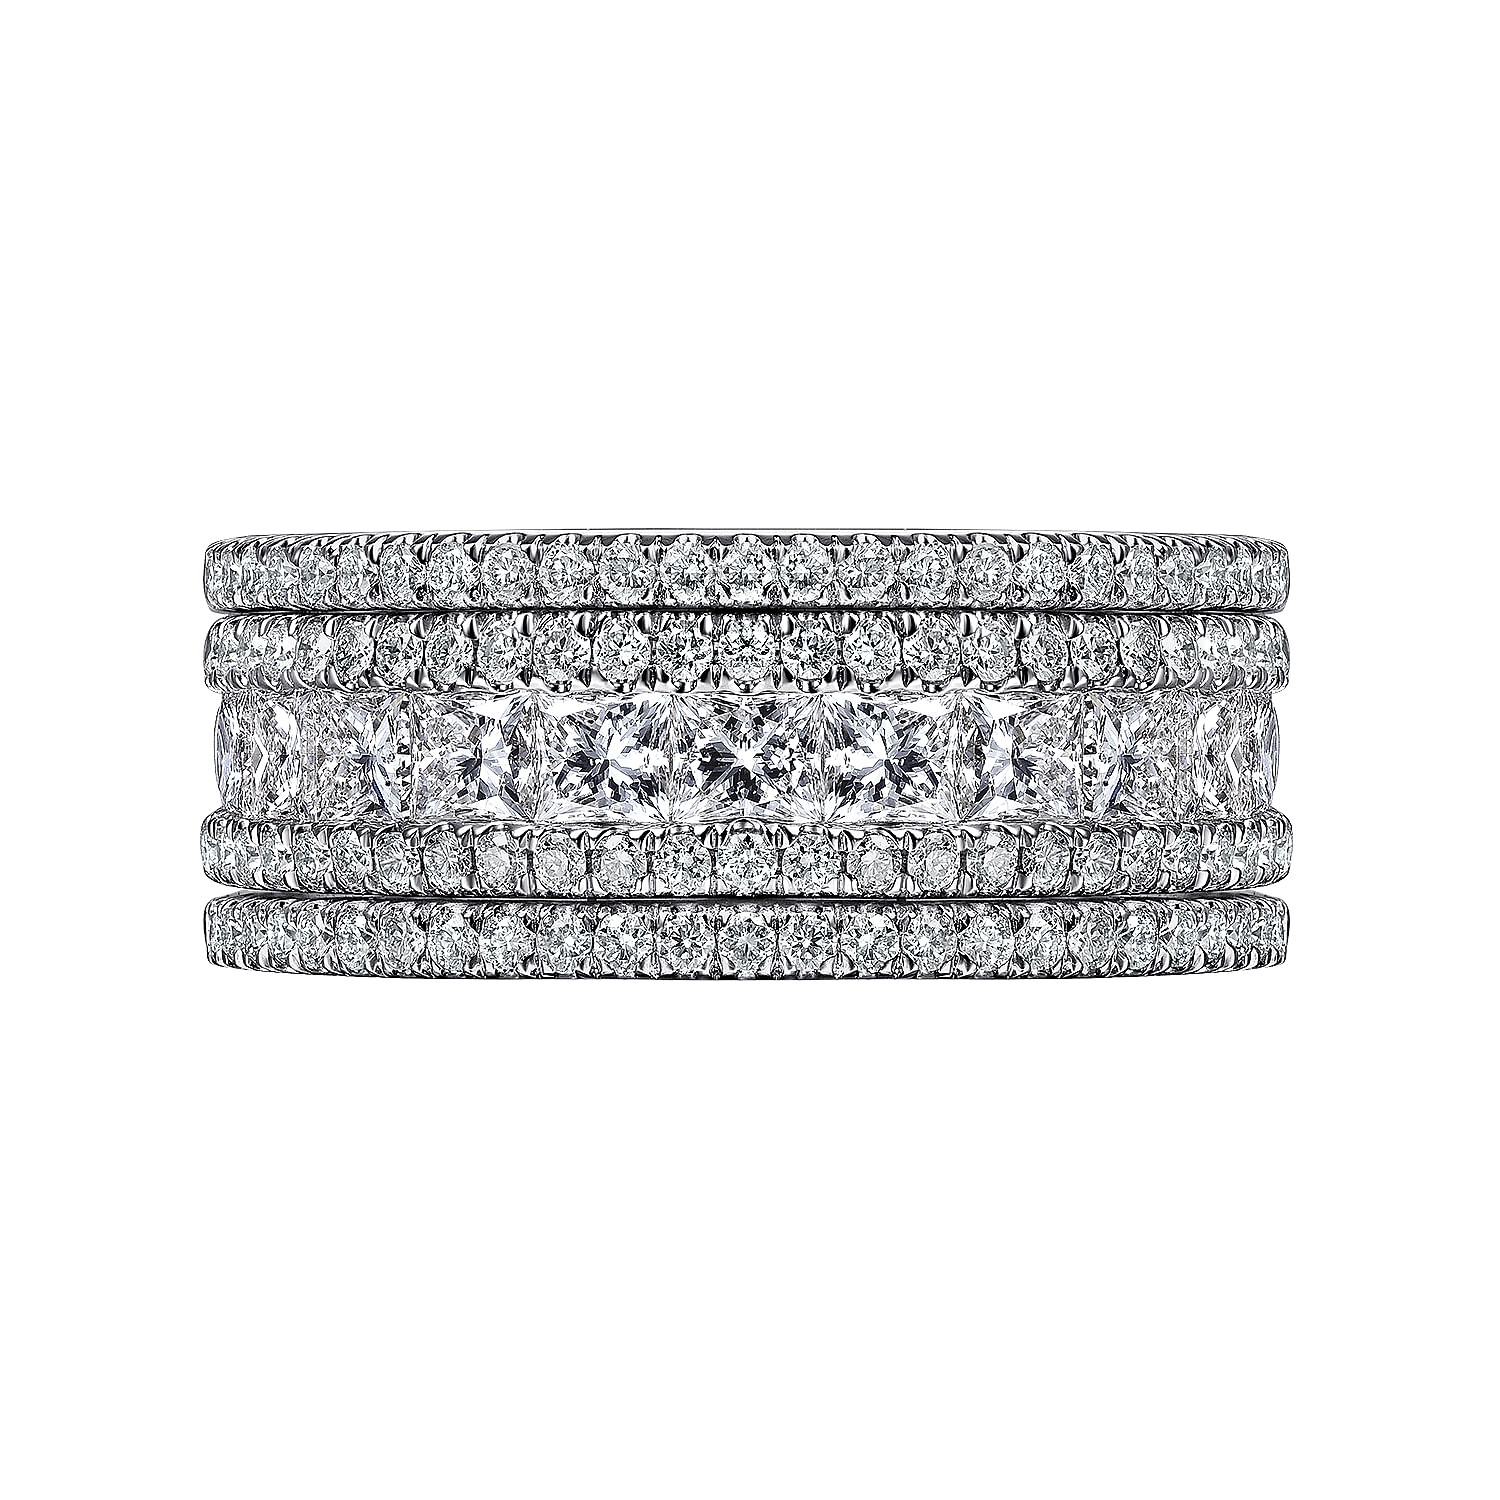 Wide 14K White Gold Channel Set Diamond Anniversary Band with Round and Princess Cut Diamonds